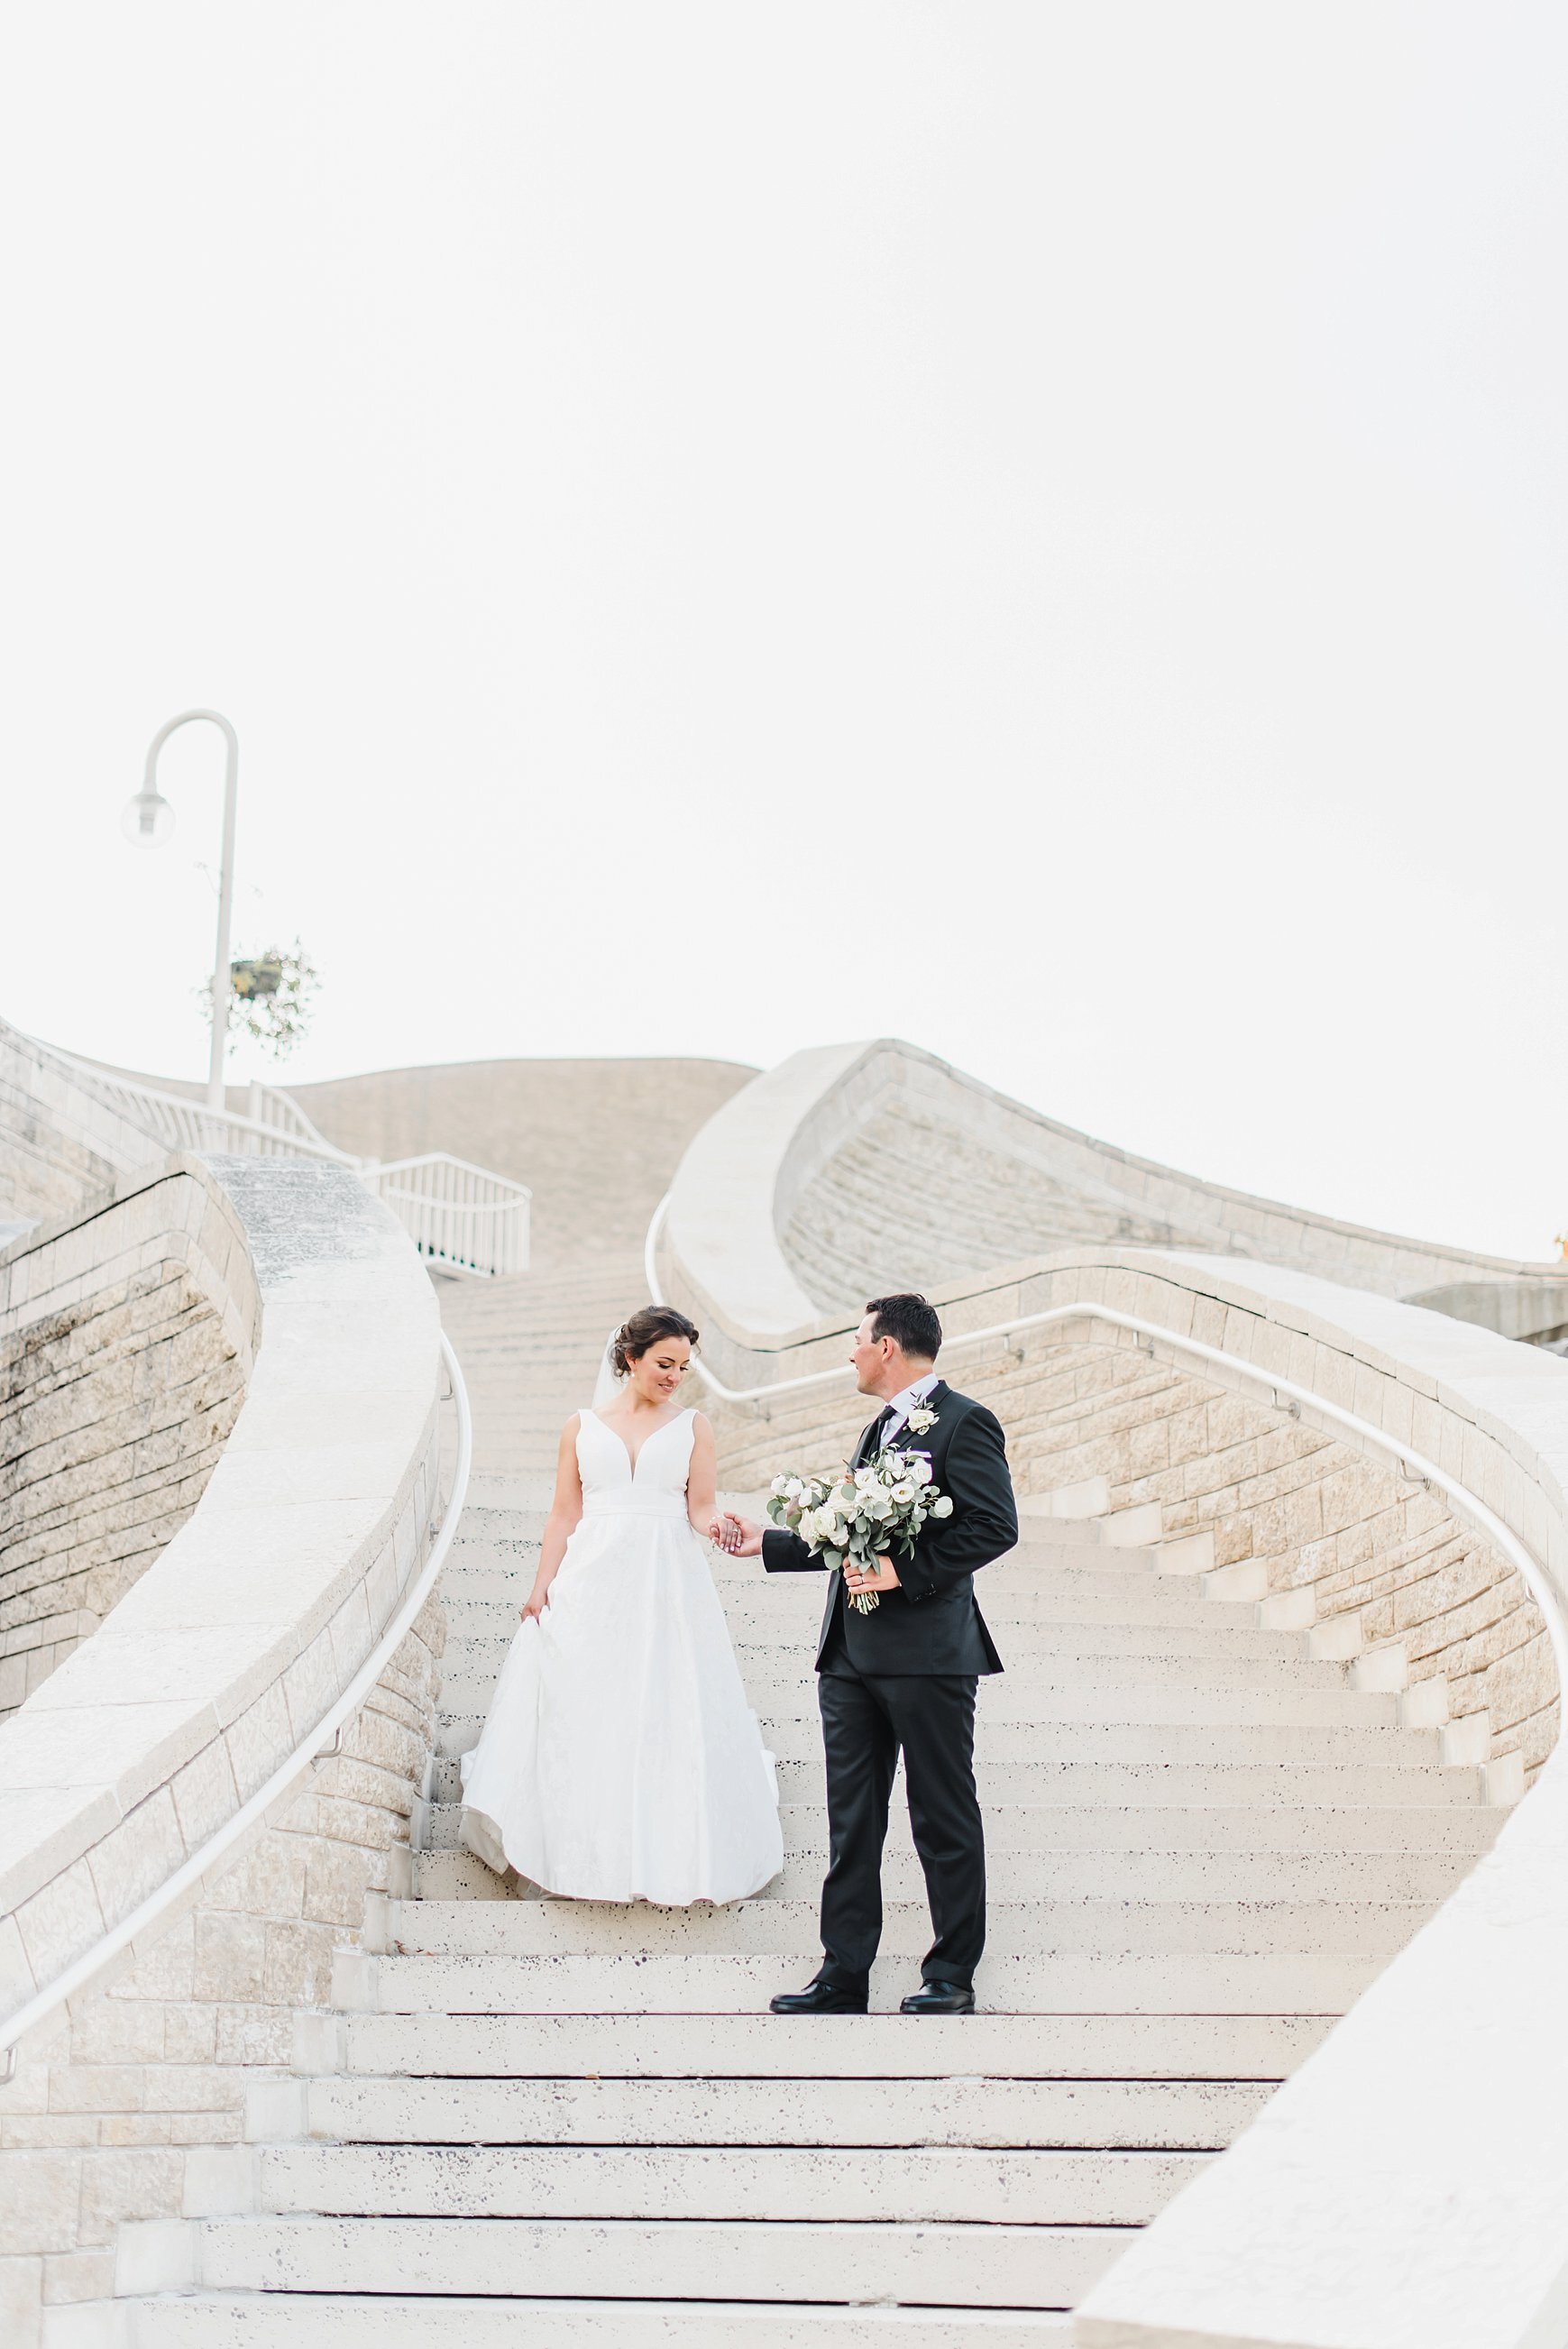  These stairs gave us such a magical backdrop to the second half of their portrait session! 